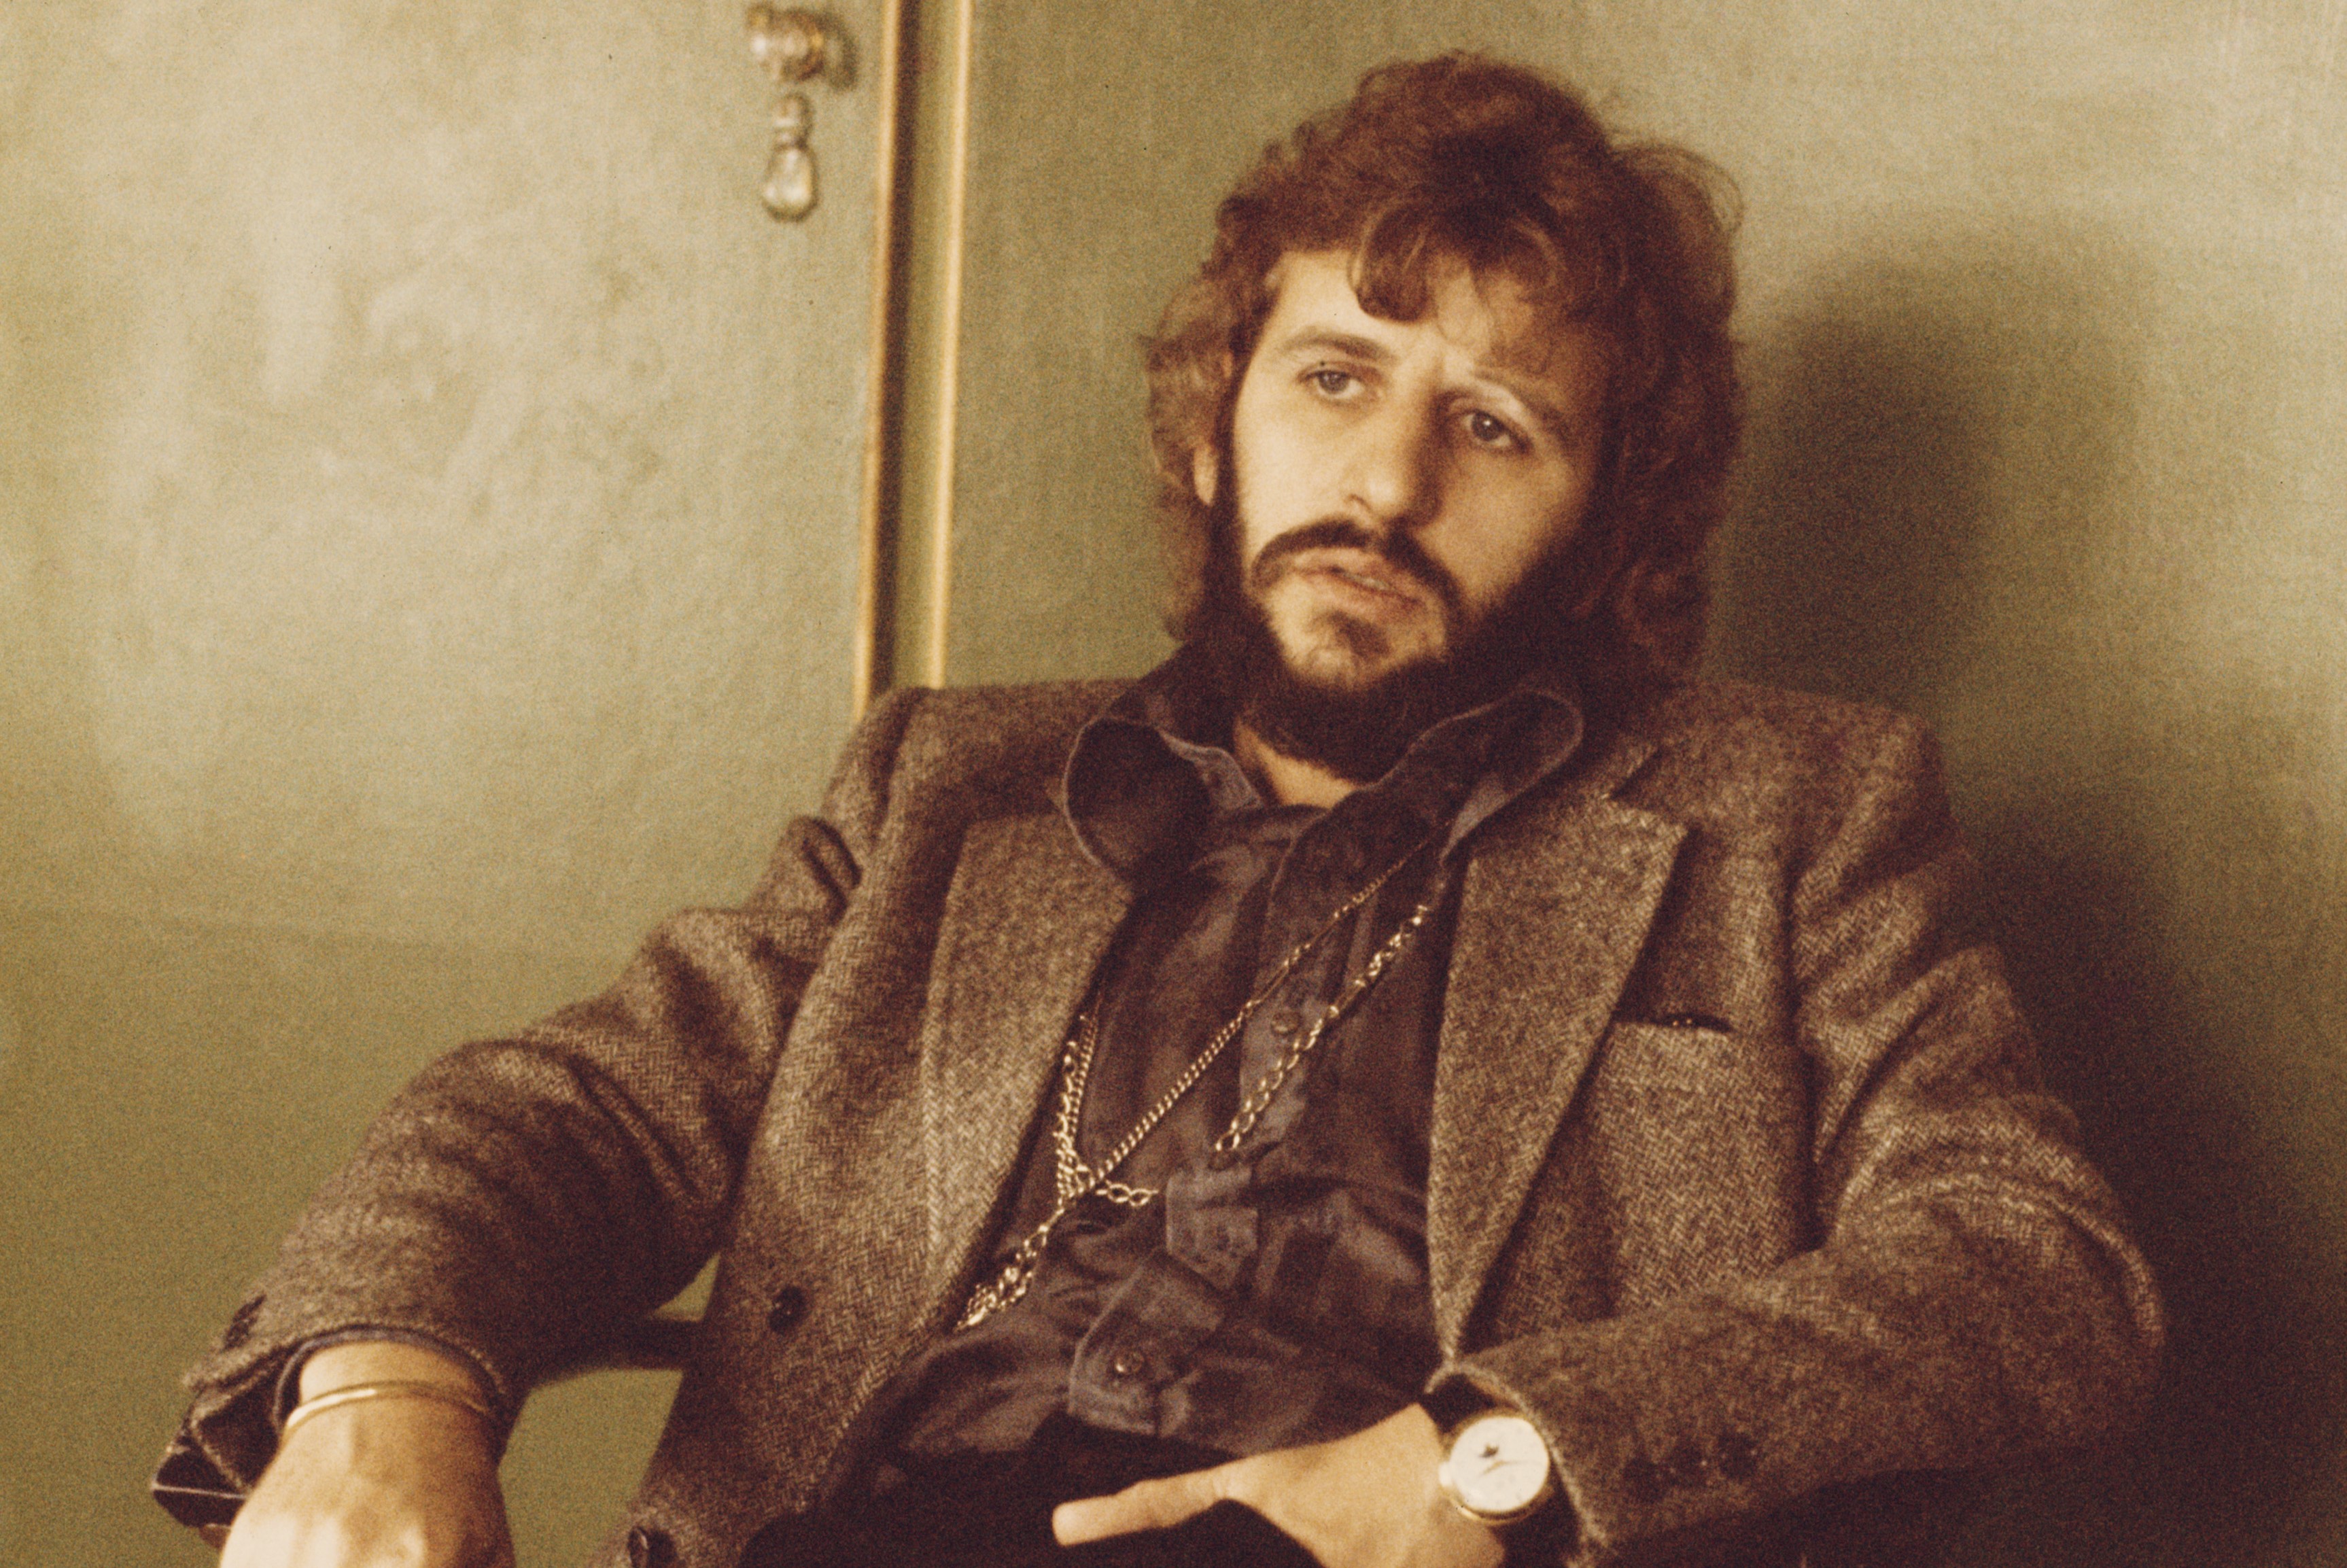 Ringo Starr sits with his hand in his pocket.